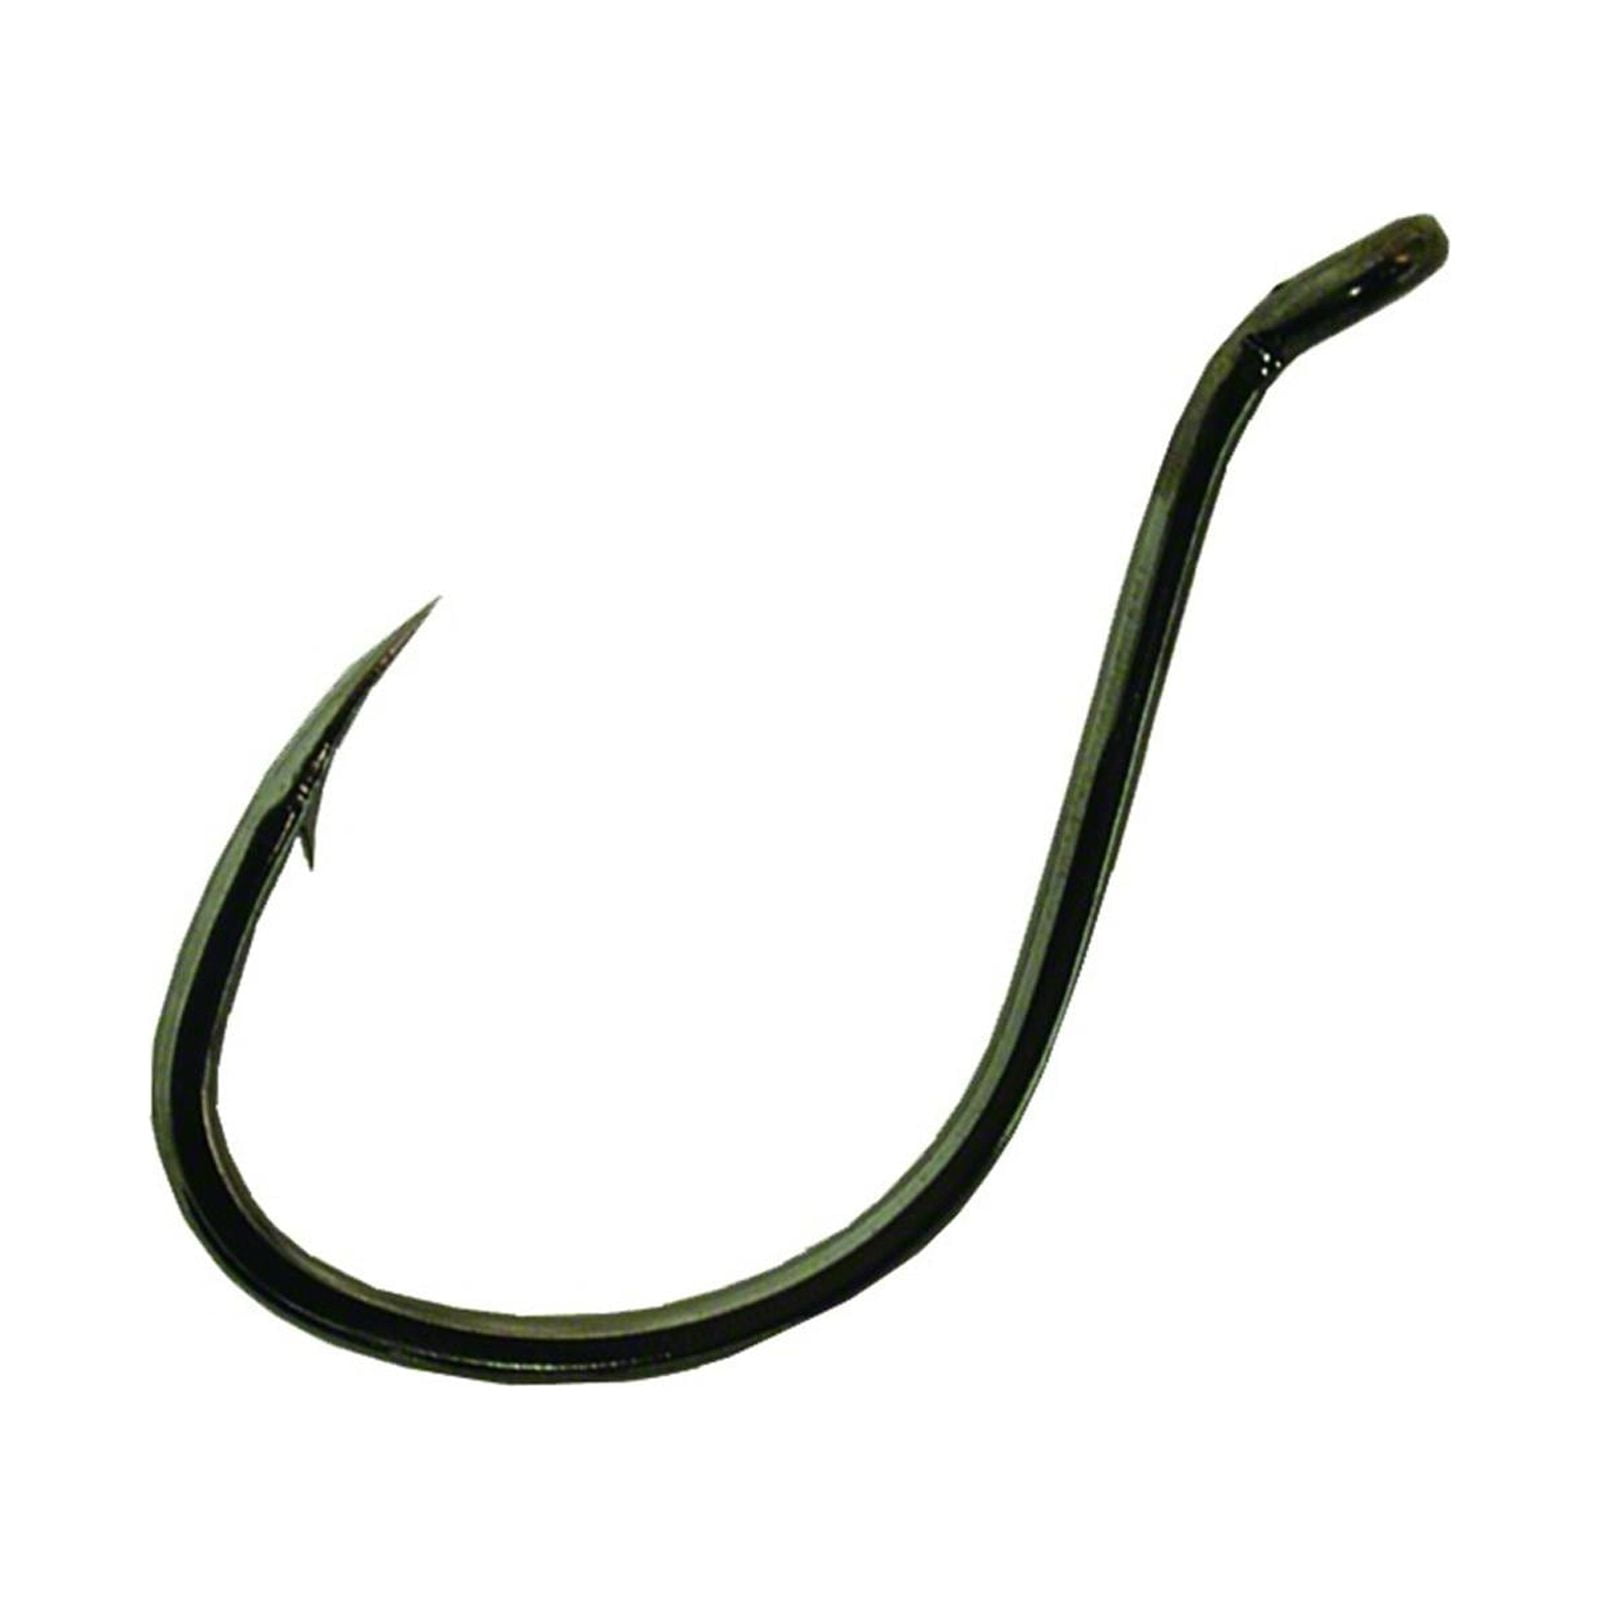 Owner 5311-171 SSW All Purpose Hook with Cutting Point Size 7/0